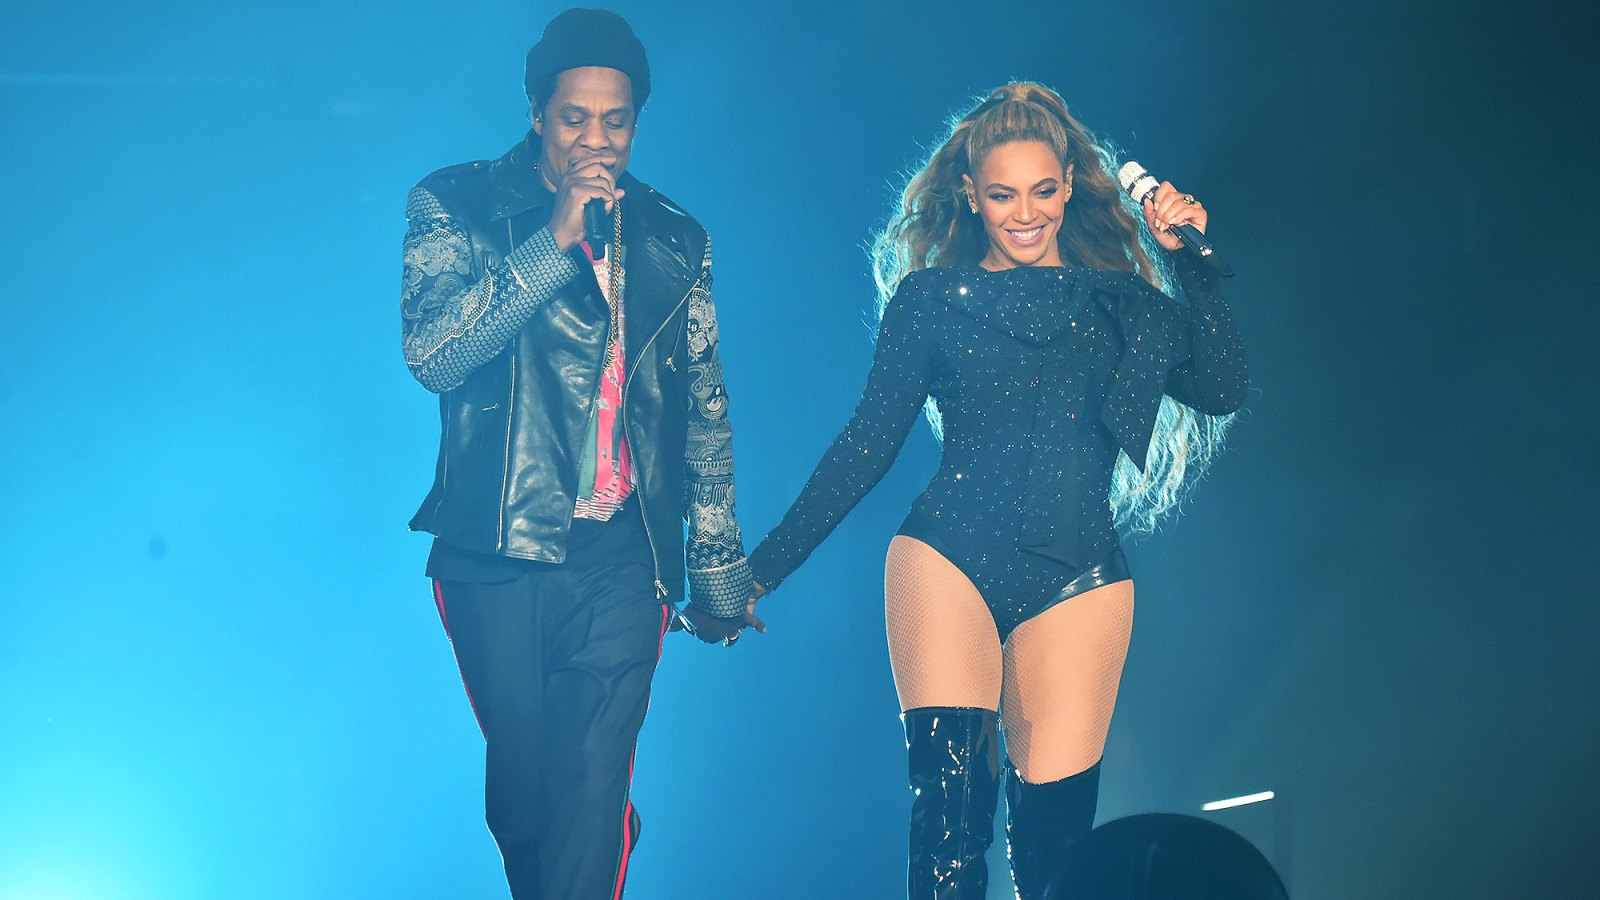 Hot Beyonce Knowles Porn - Beyonce and Jay Z Pose Nude in New Tour Book Pics